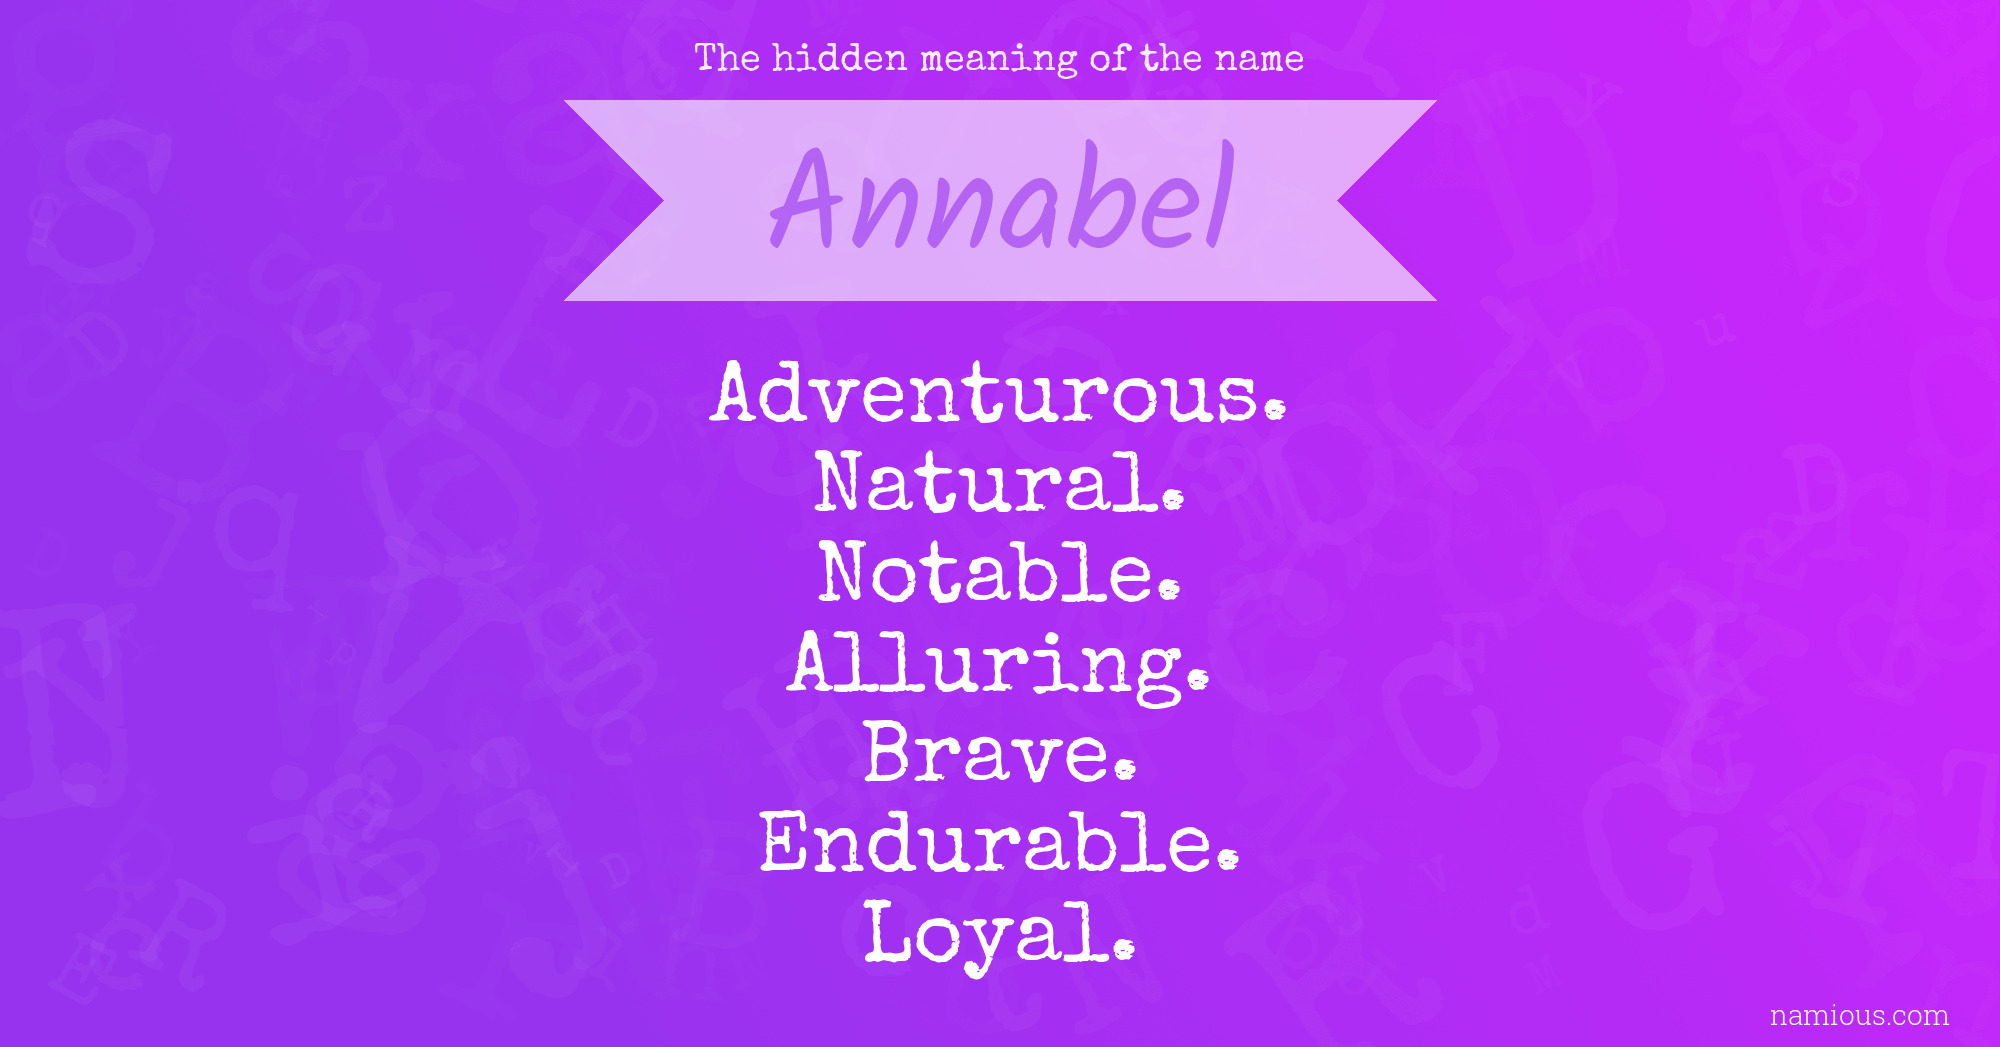 The hidden meaning of the name Annabel